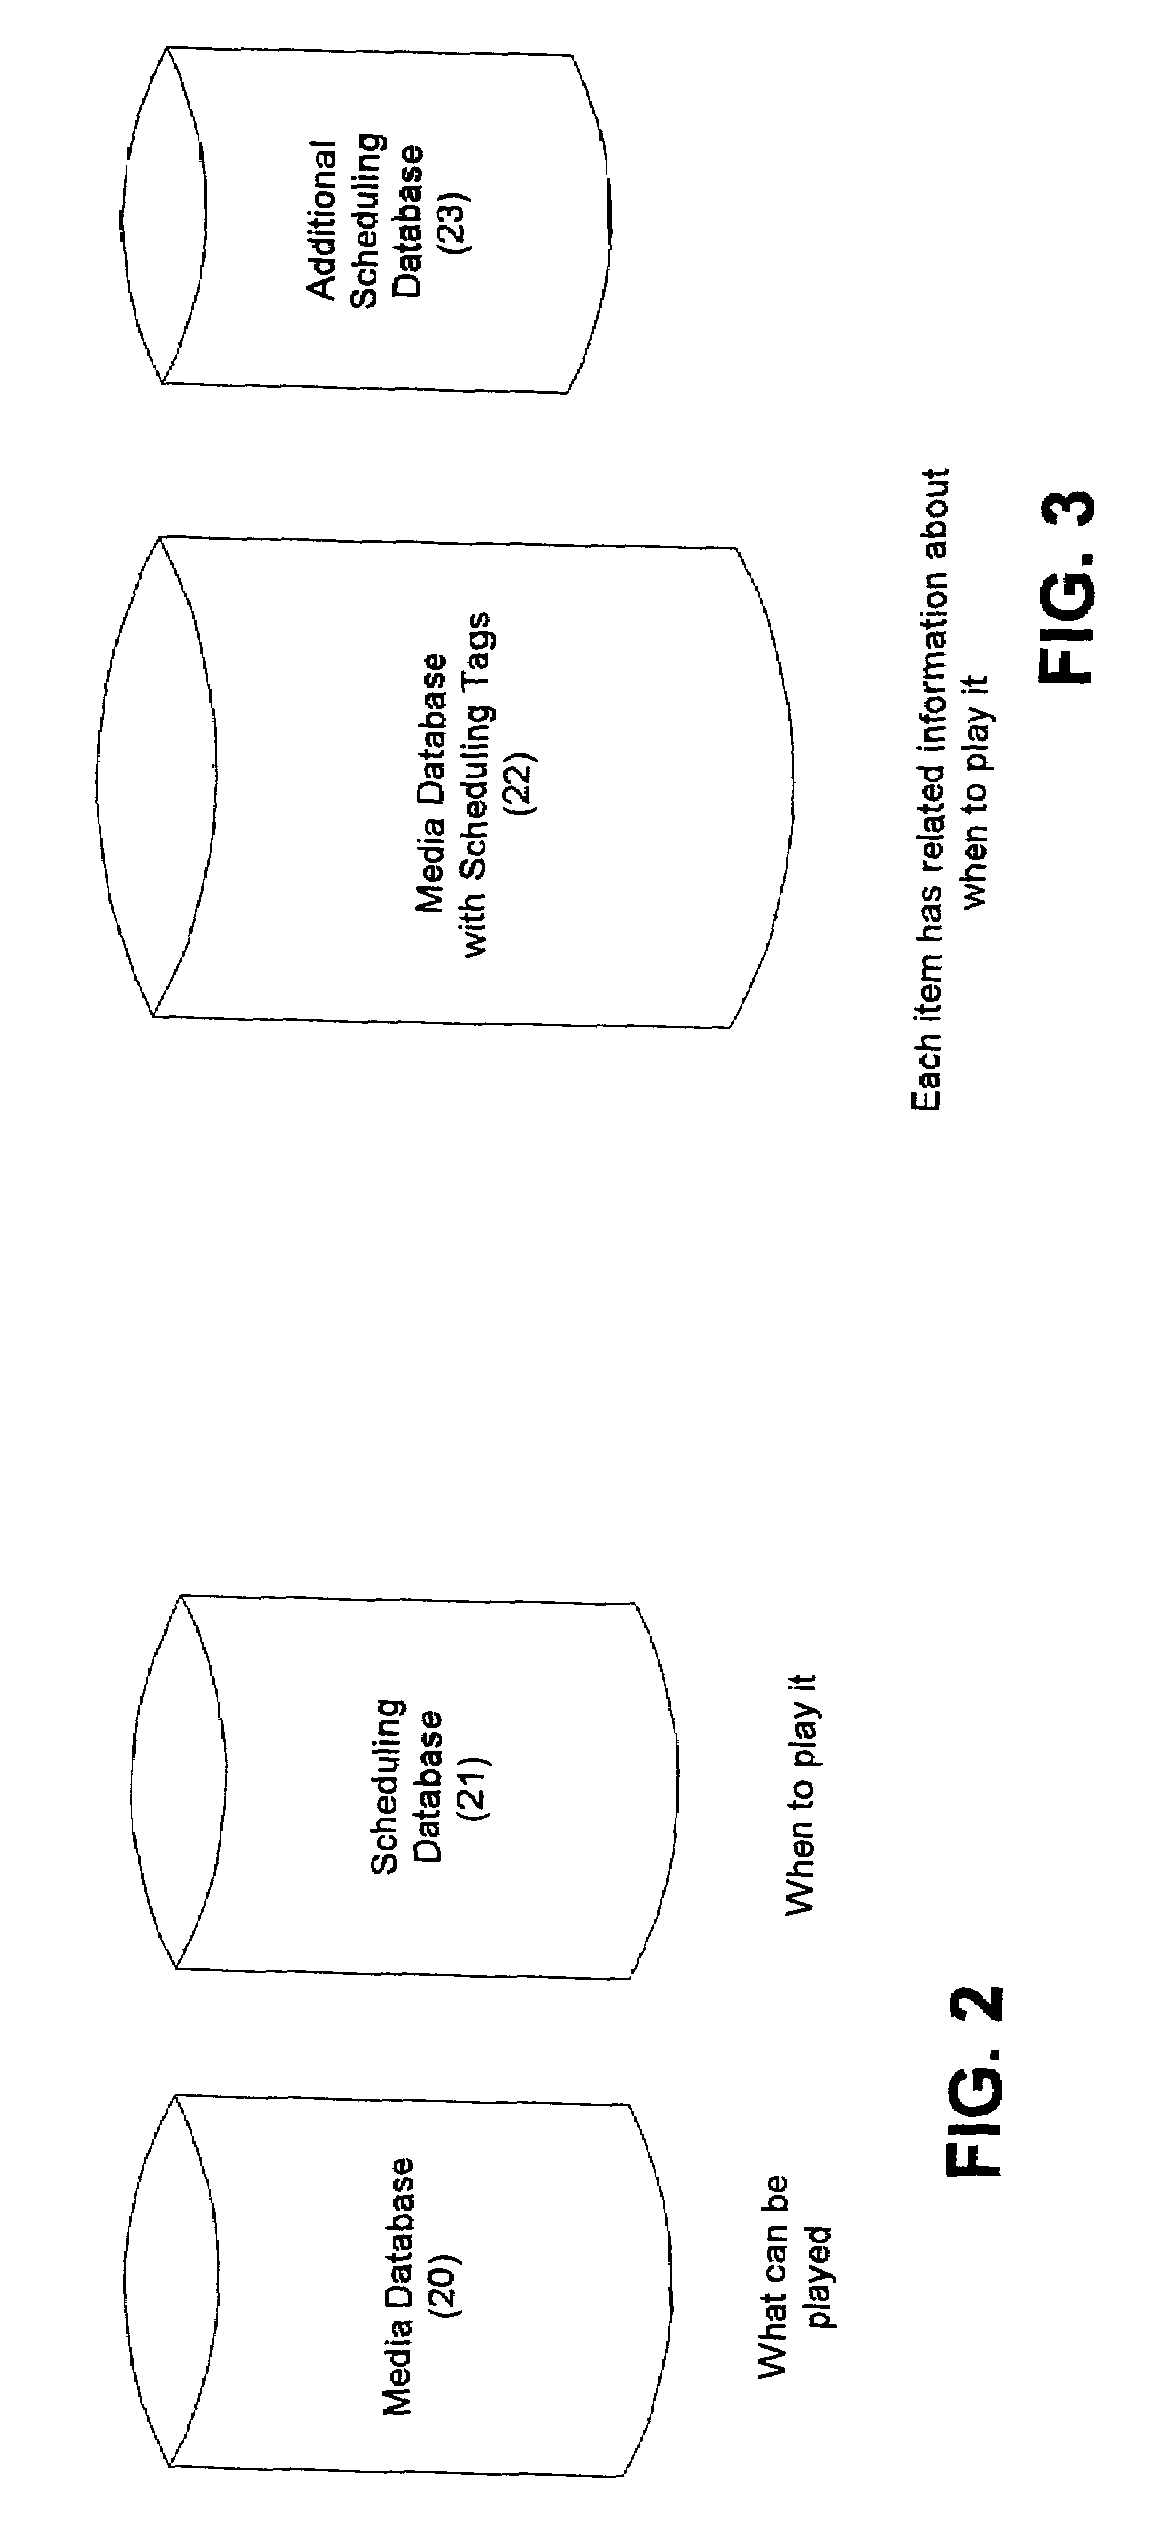 Method and system for electronically distributing, displaying and controlling advertising and other communicative media